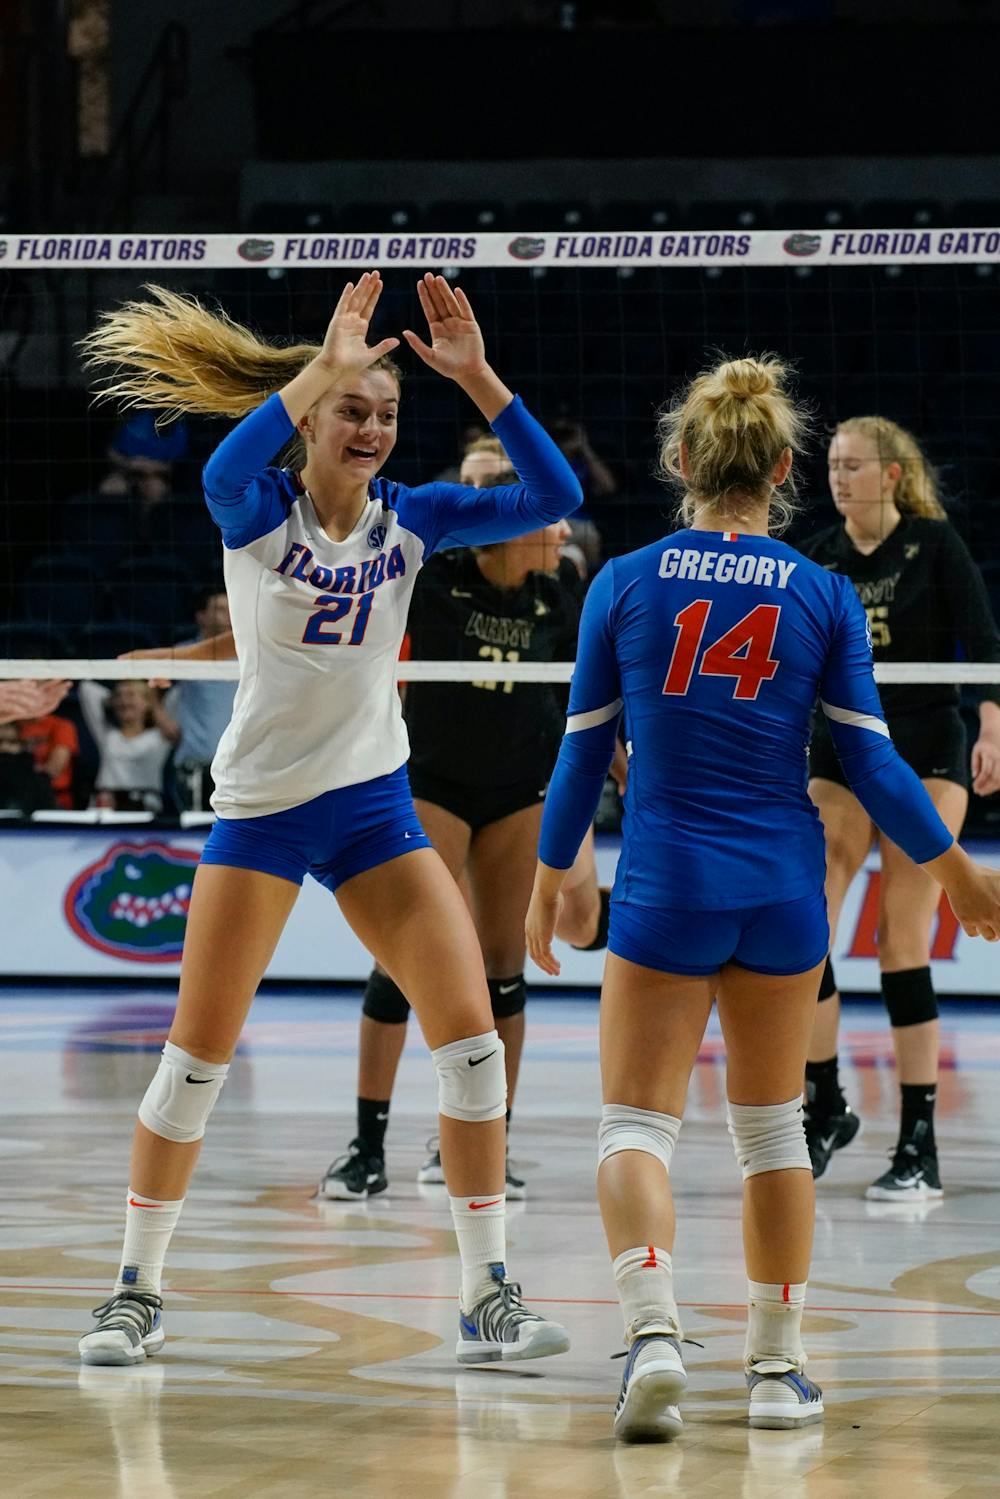 <p>Freshman setter Marlie Monserez (21) celebrates with libero Allie Gregory after a Florida point on Sept. 15 against Army. </p>